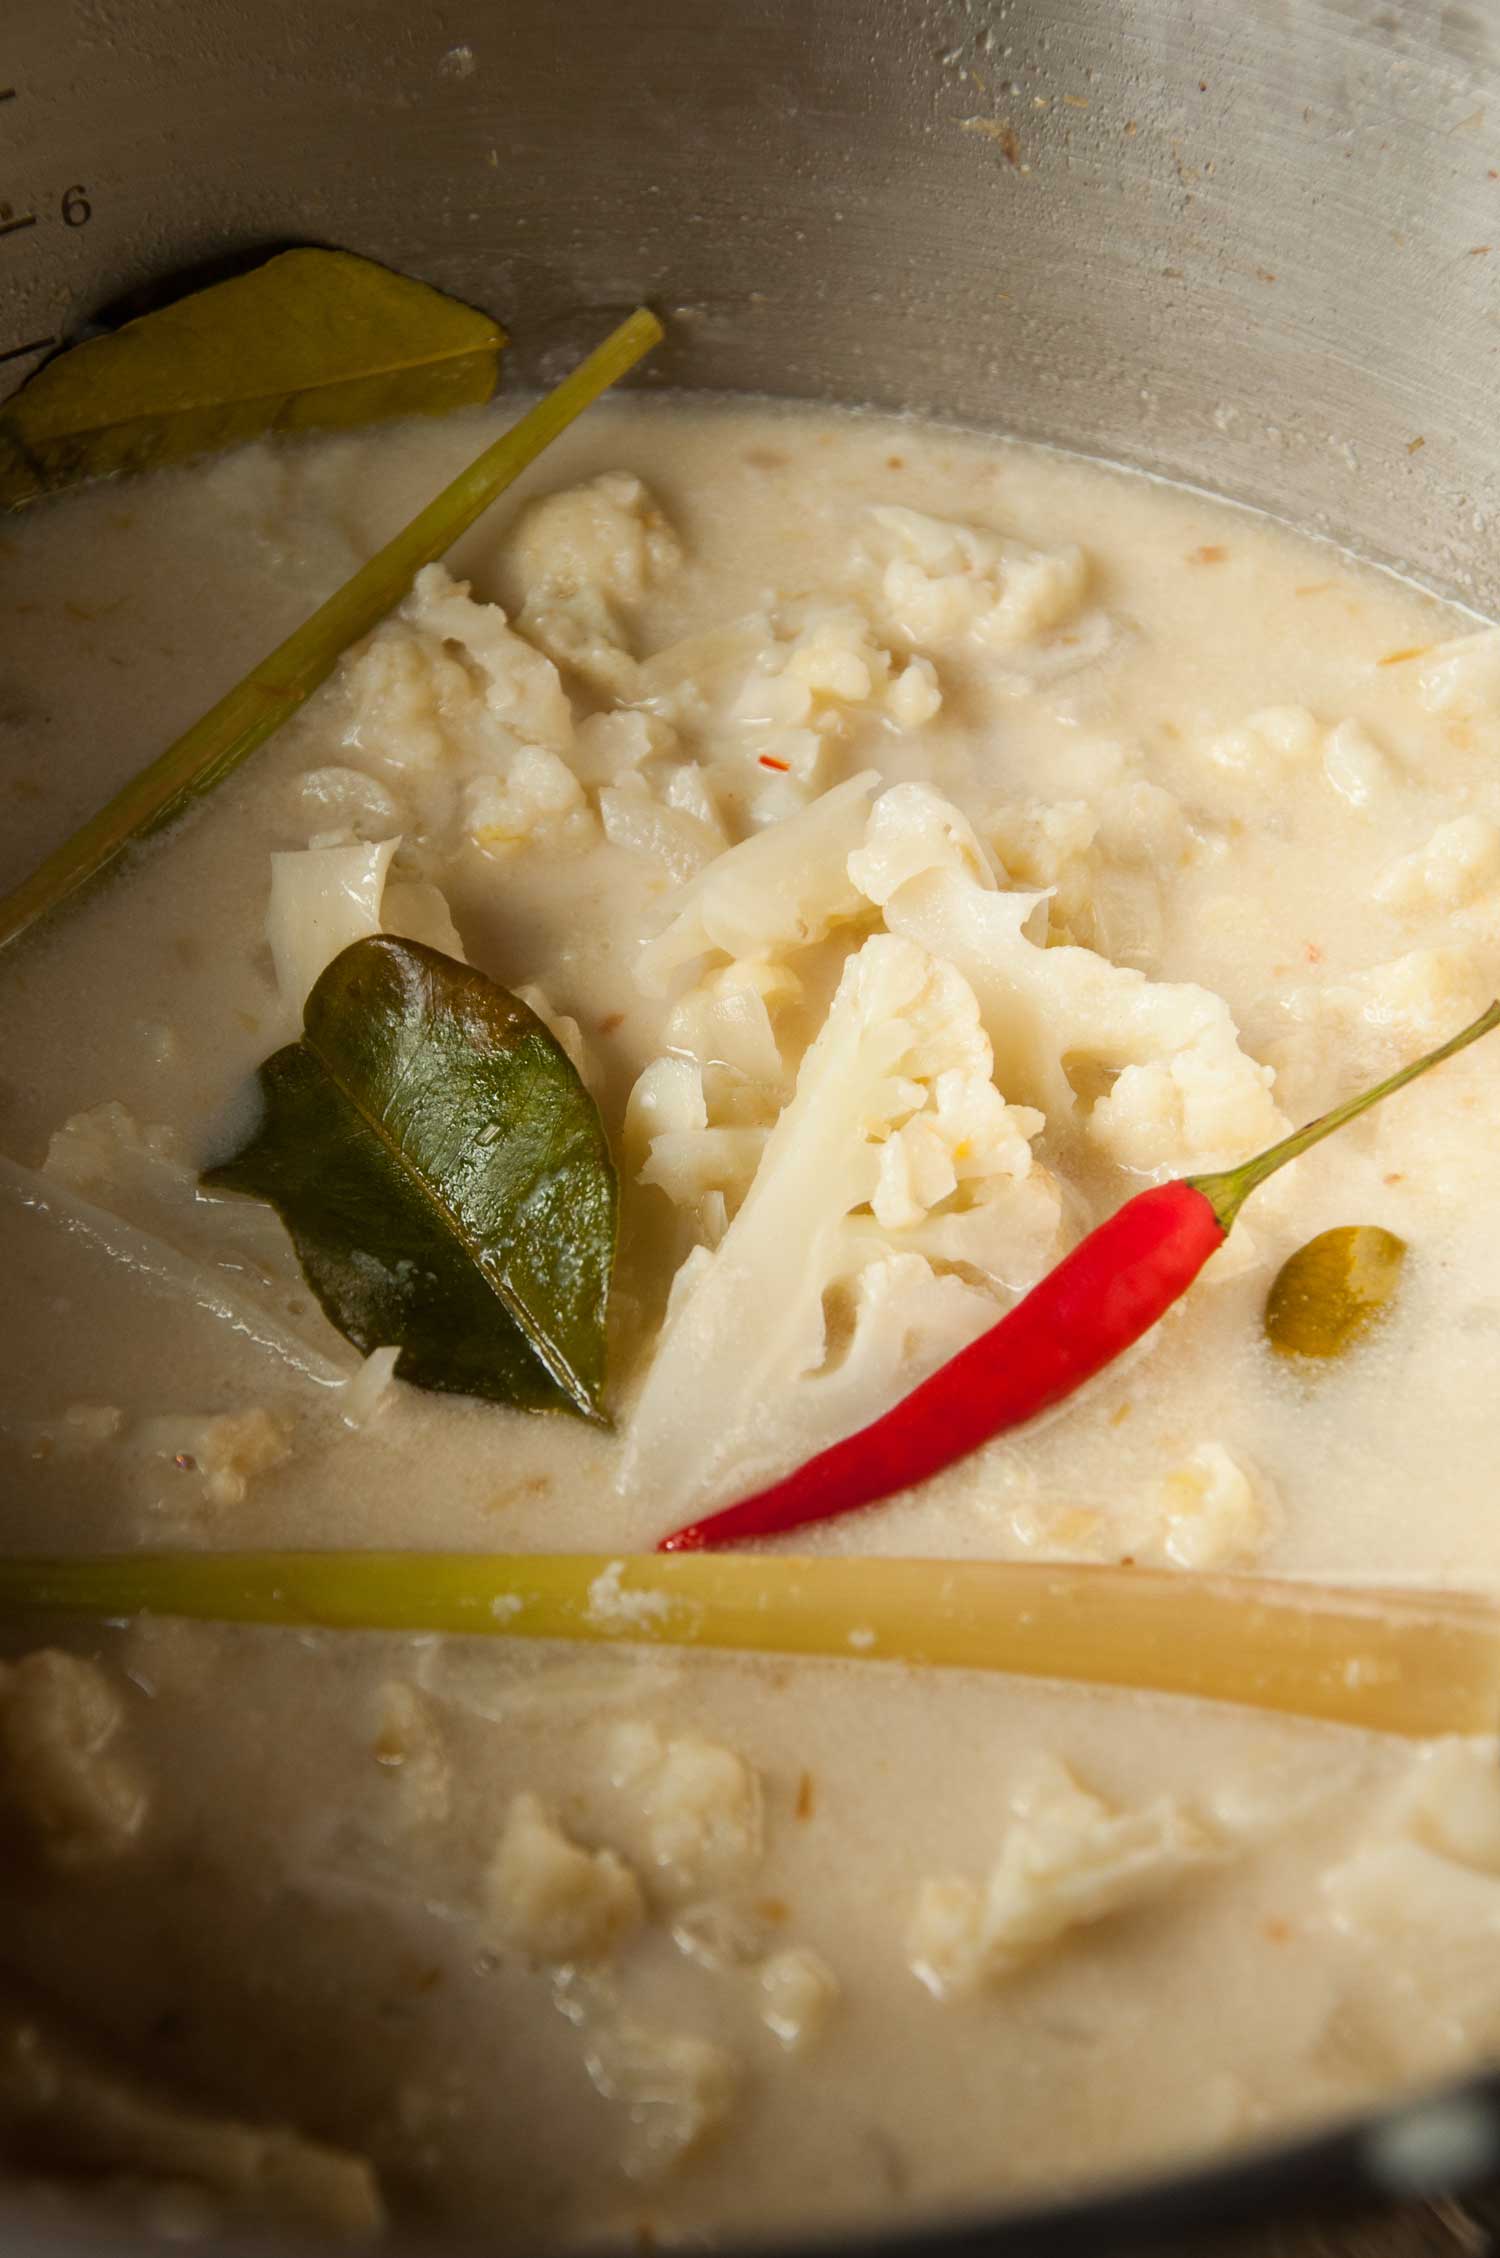 Creamy coconut milk soup with chunks of cauliflower, red chili peppers, lemongrass and lime leaves. 